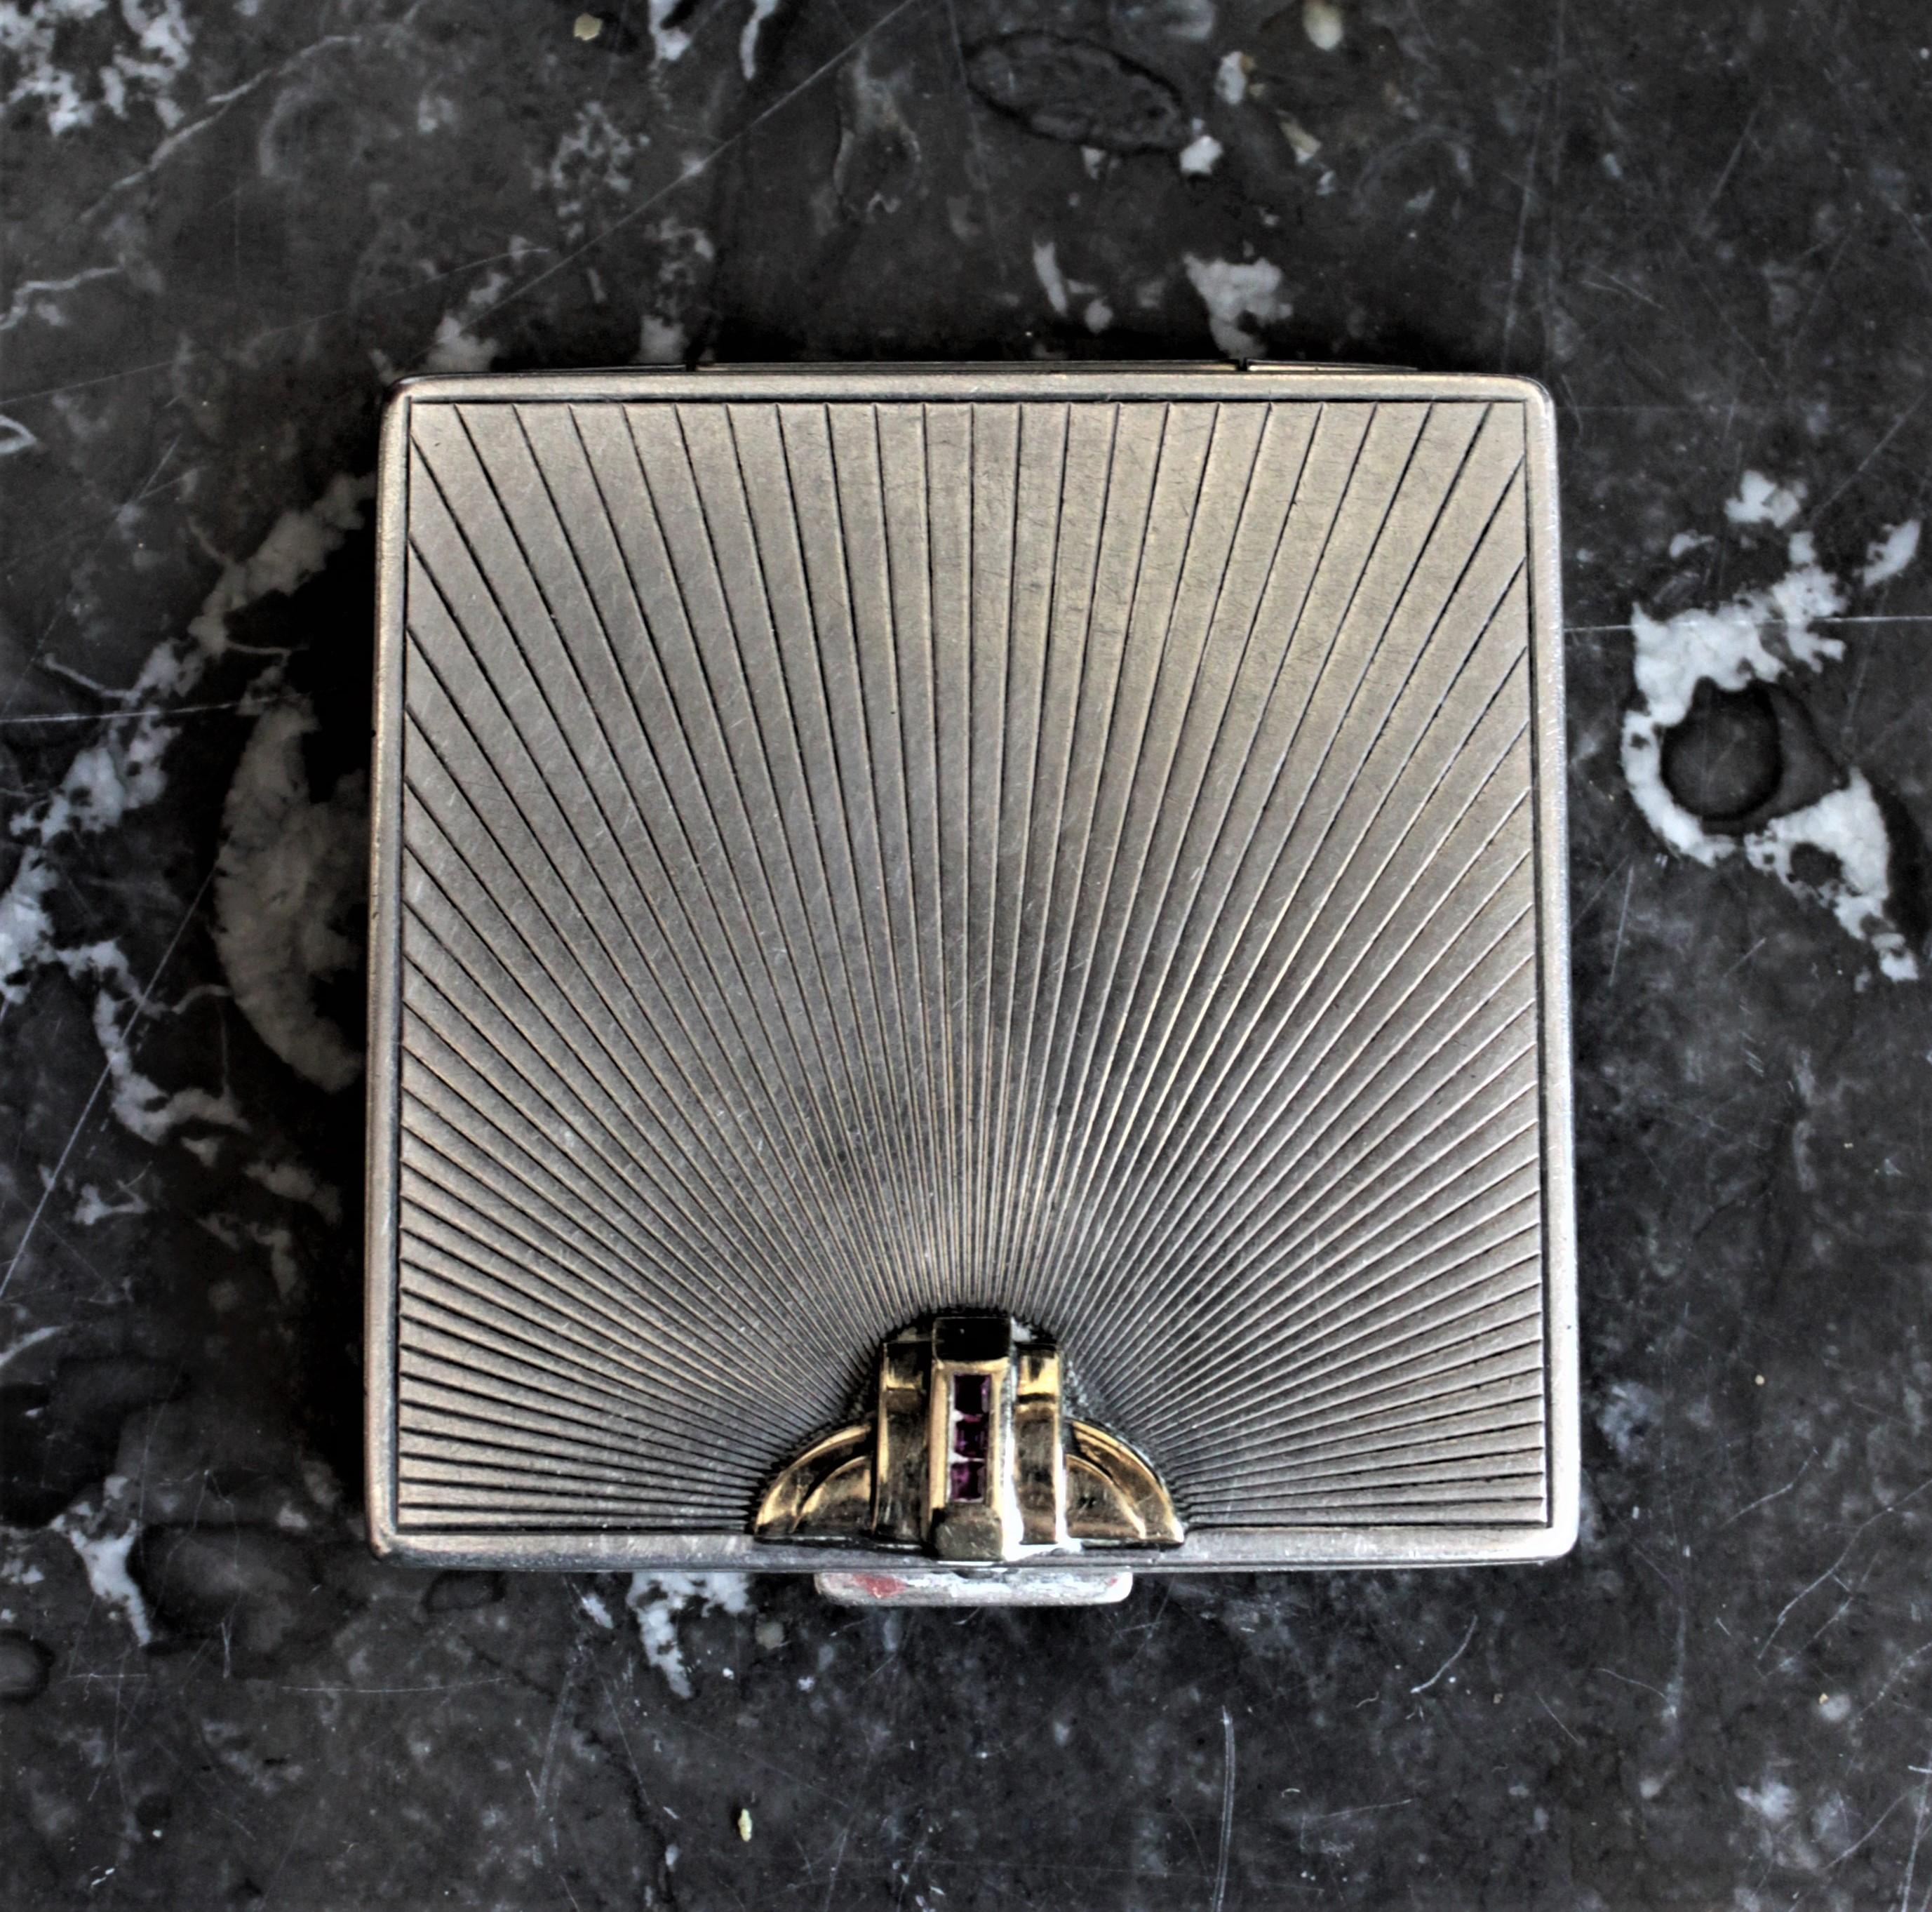 This Art Deco sterling silver and 14-karat yellow gold ladies compact was made in England during the 1930s, by Black, Starr & Gorham. The compact has an engraved case done in a typical Art Deco styled linear fashion with a stepped Deco 14-karat